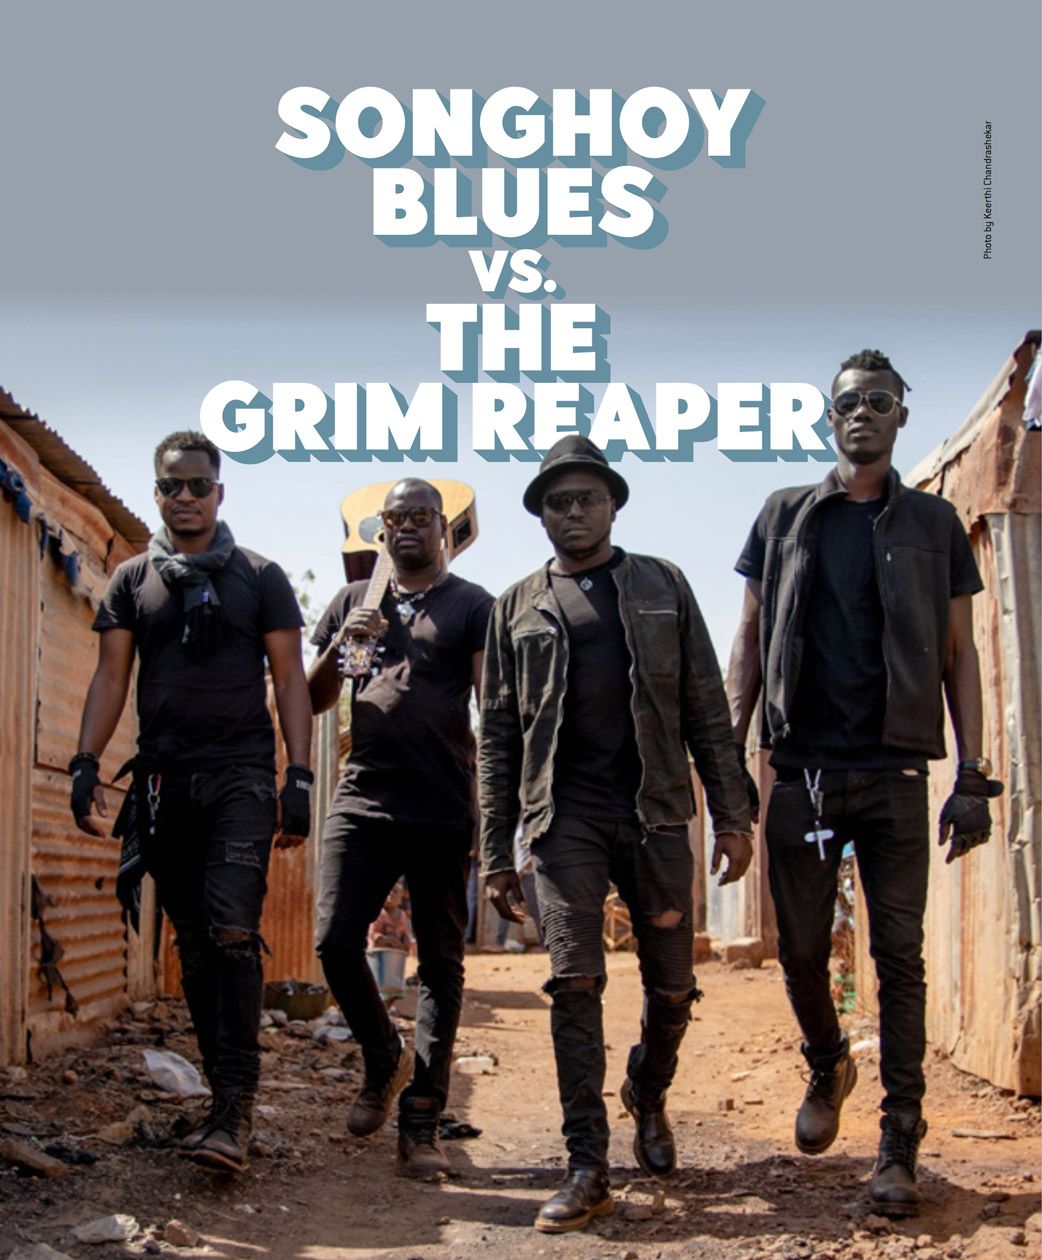 Mali’s Songhoy Blues vs. the Grim Reaper